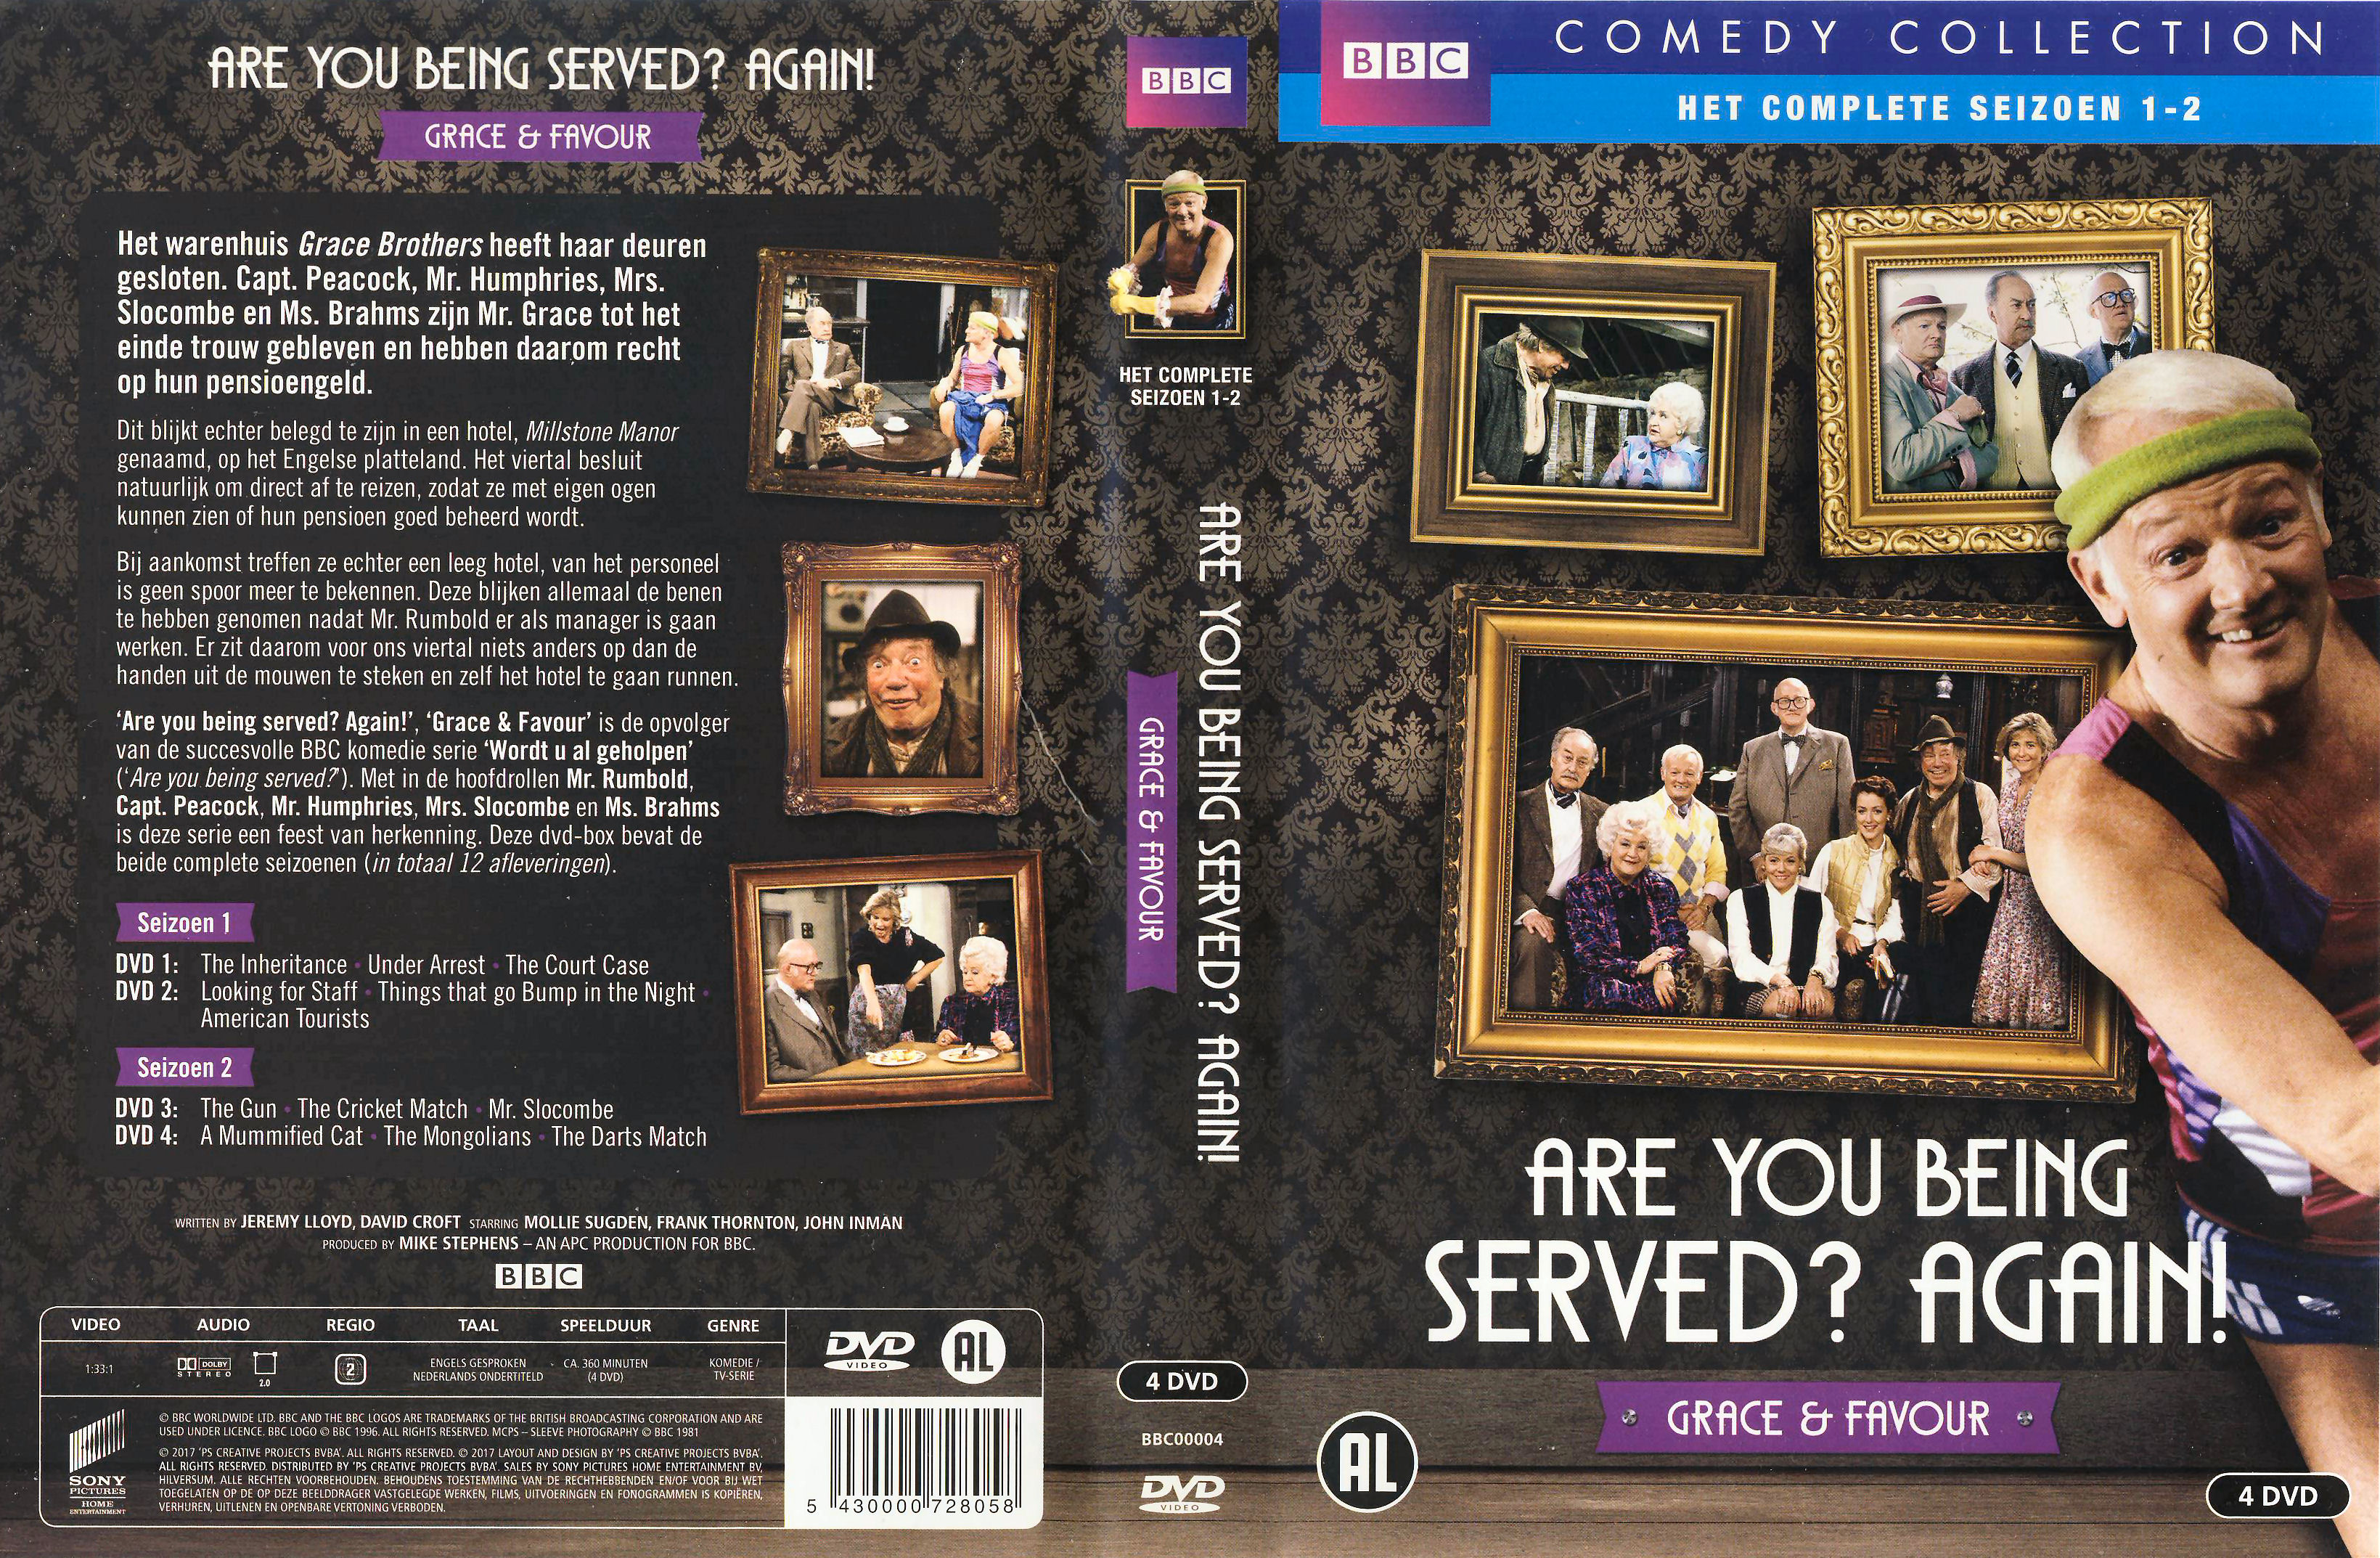 Are You Being Served & Again ! Seizoen 2 vDvD 1